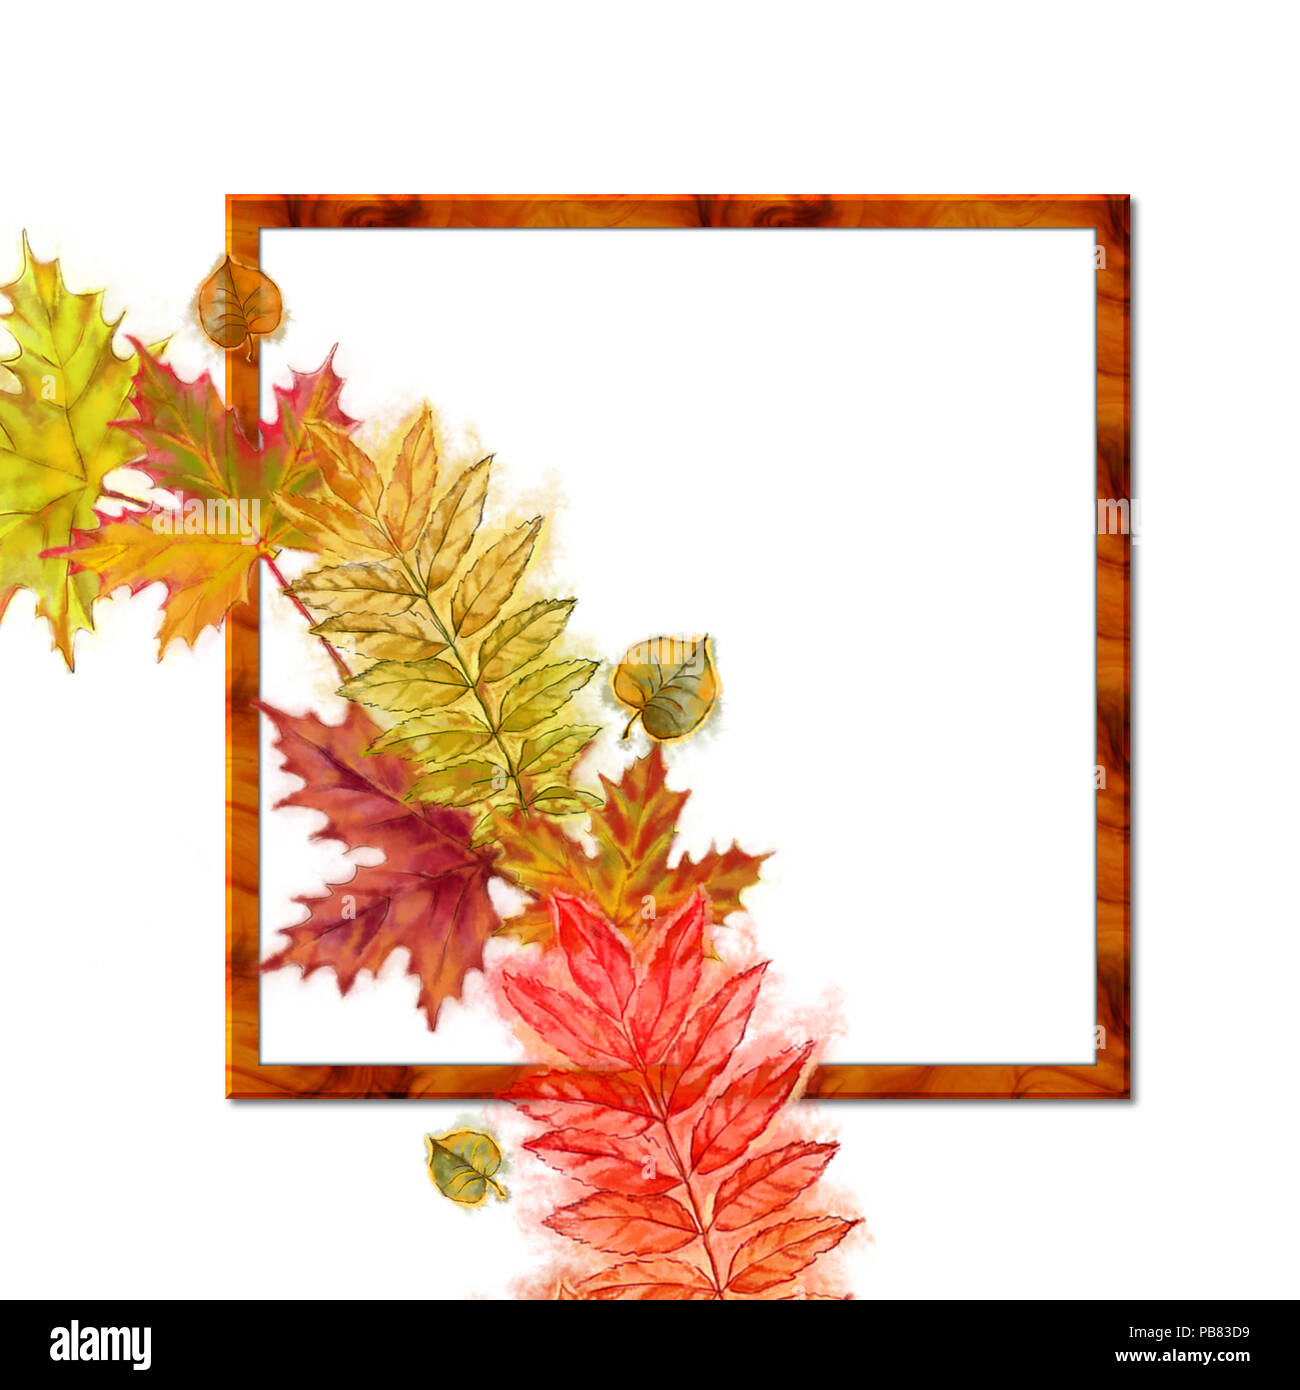 Autumnal Template with Square Shaped Frame and Leaves Half Wreath. Watercolor Autumn Leaves Design for Print, Announcement, Cards etc. Stock Photo